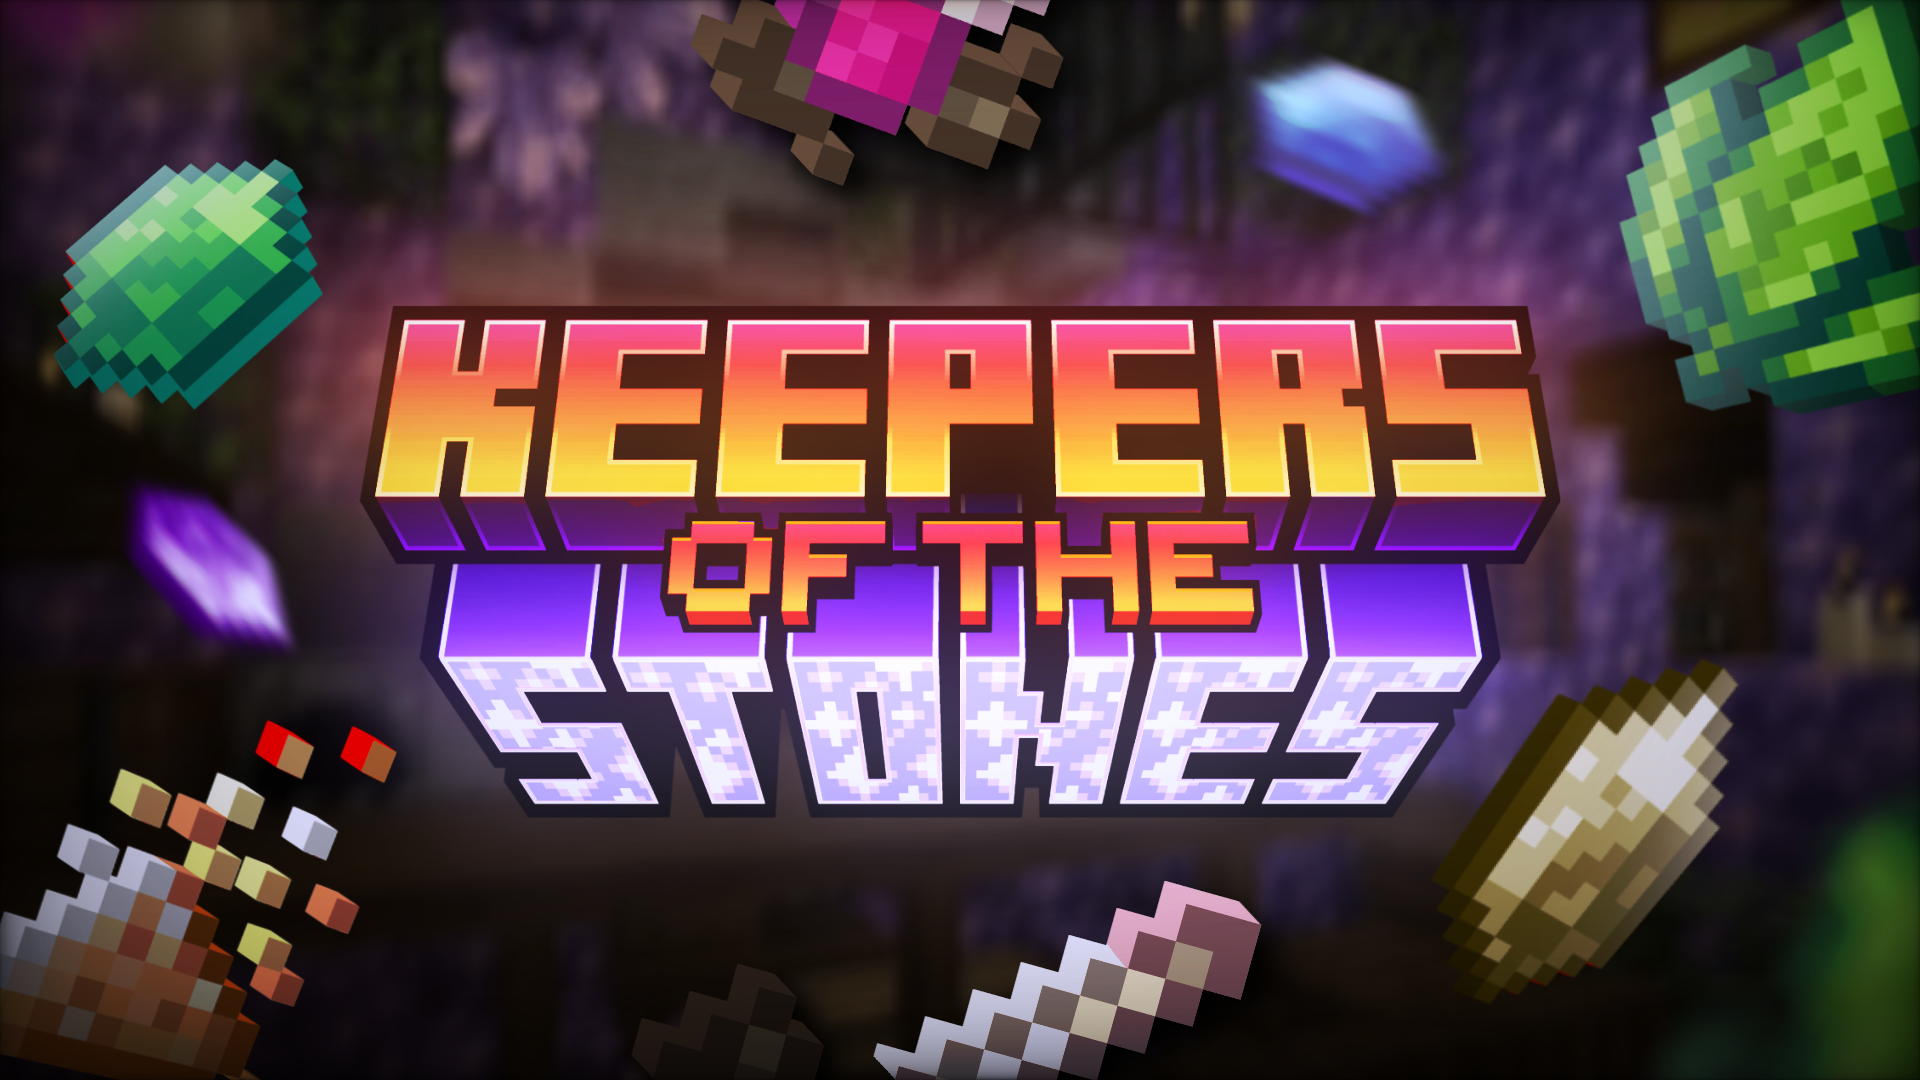 Keepers of the Stones screenshot 1